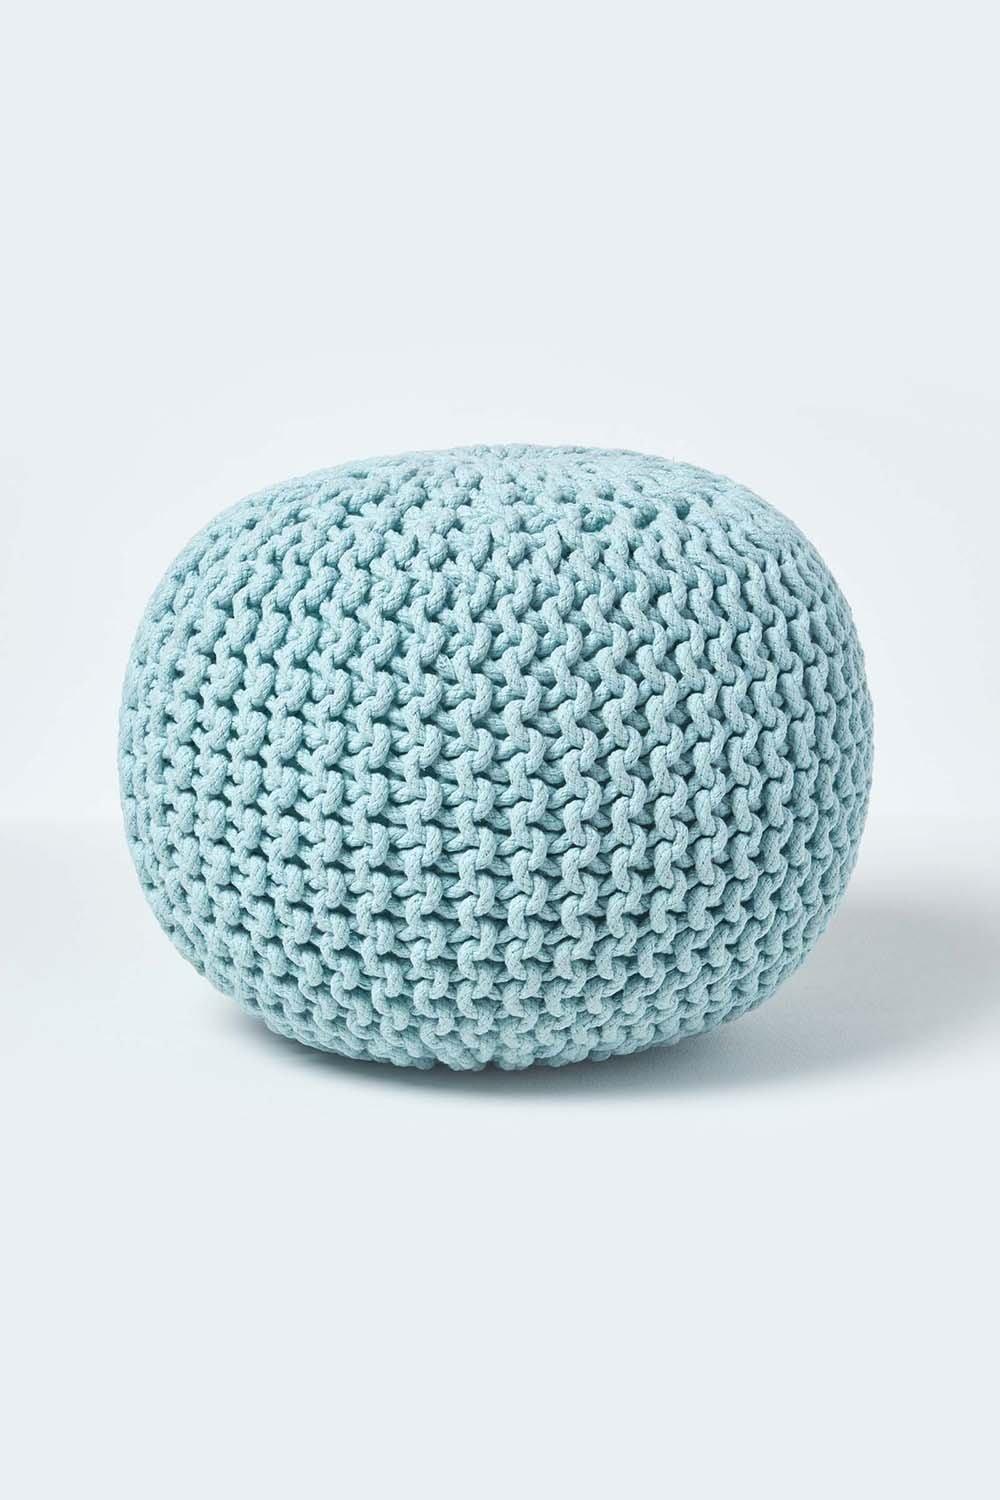 Homescapes Round Cotton Knitted Pouffe Footstool|bright blue